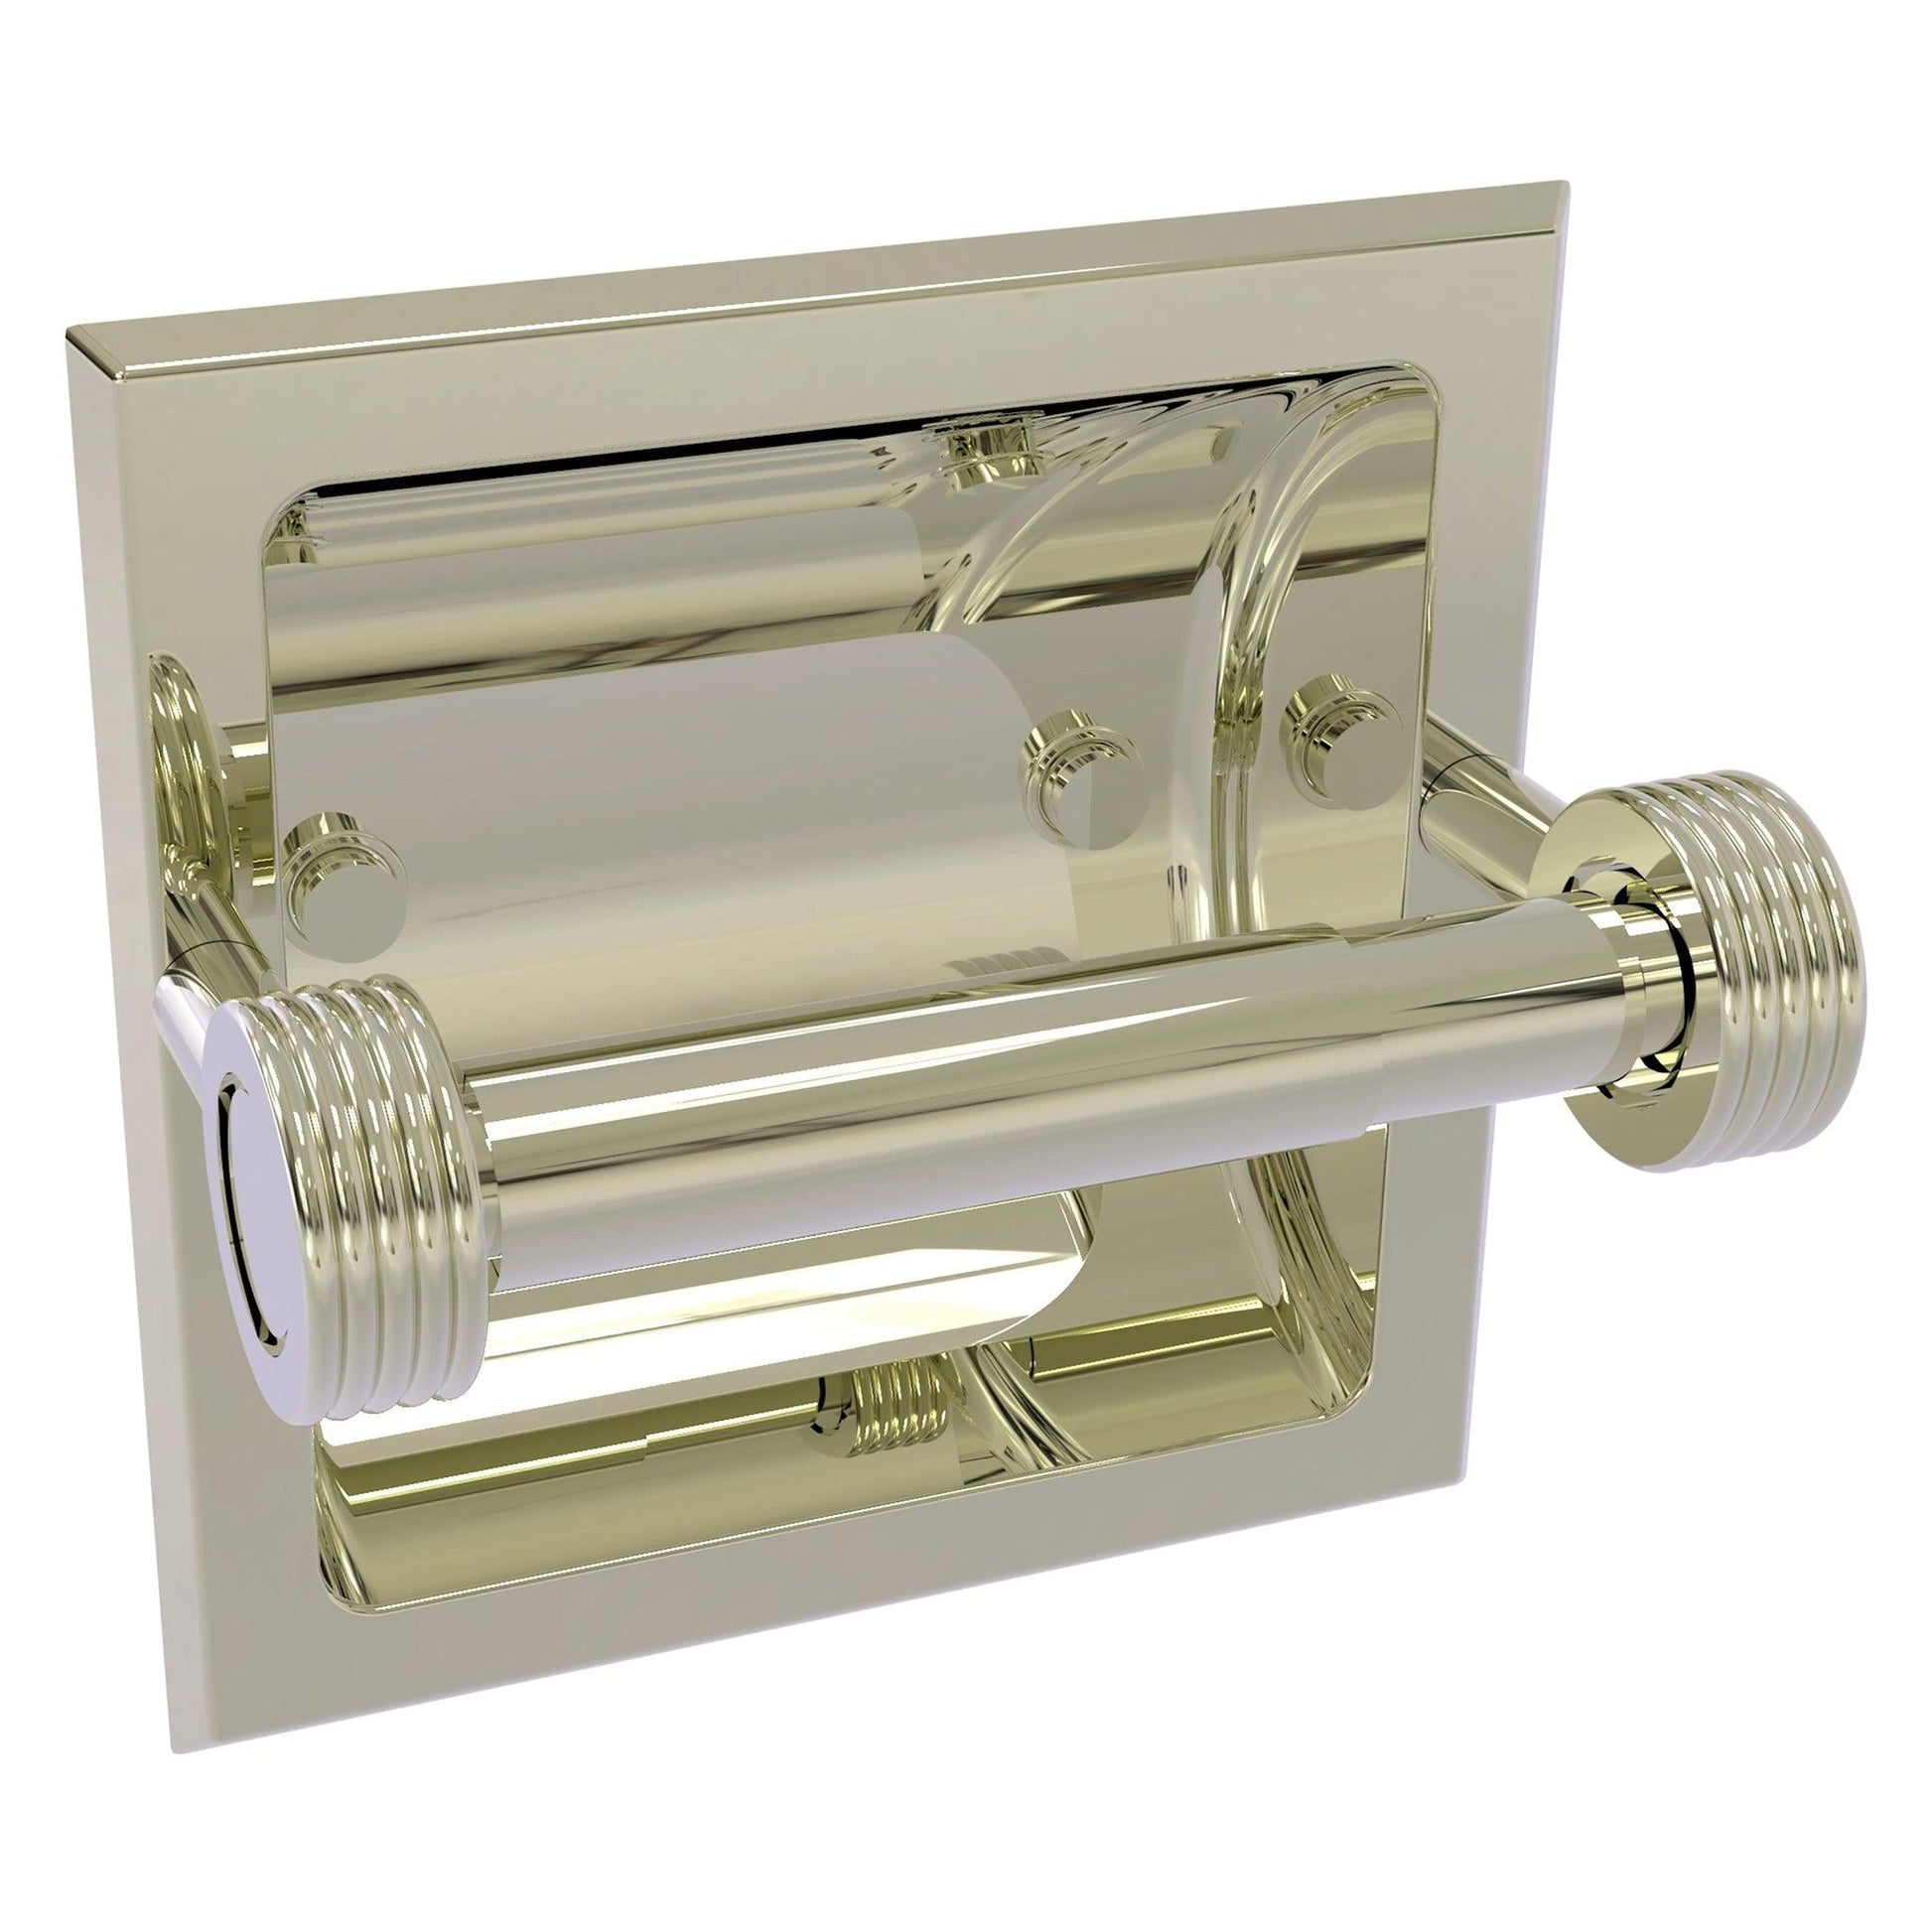 Allied Brass Skyline 2024-CG 6.3" x 6.1" Polished Nickel Solid Brass Recessed Toilet Tissue Holder With Grooved Accents